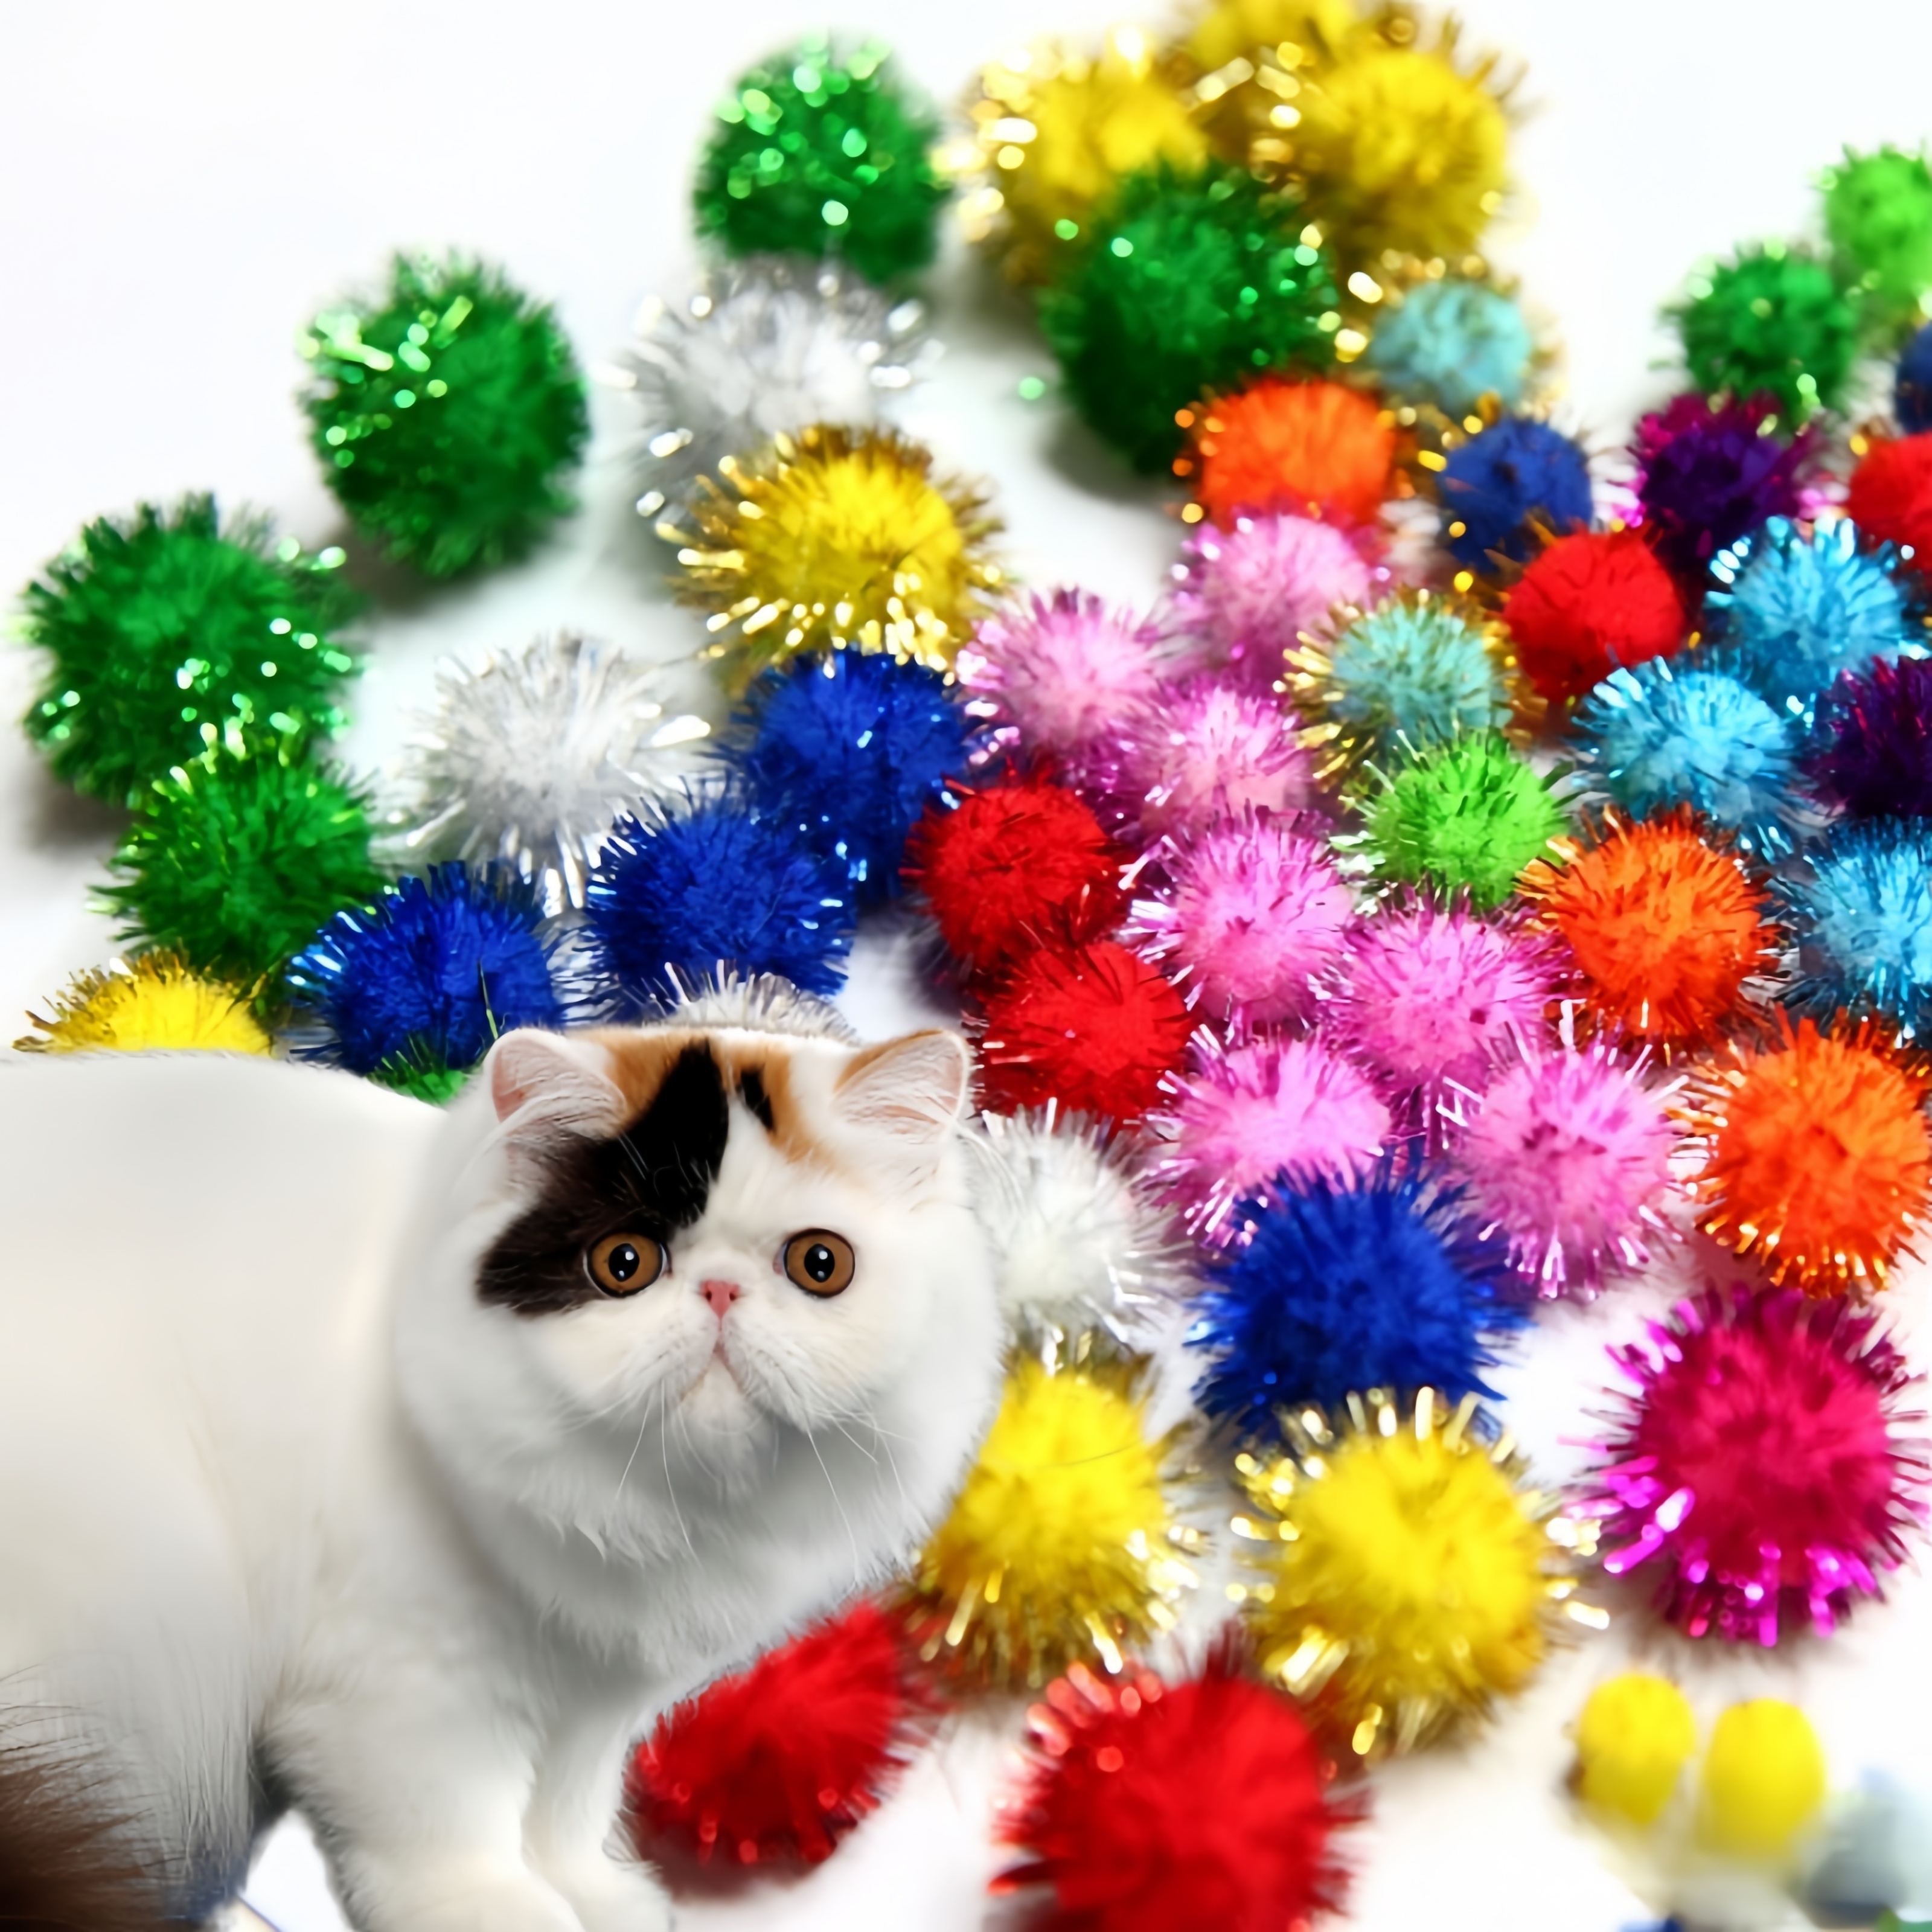 

50-piece Sparkling Cat Toy Set - Plush & Glitter Balls For Interactive Play, Ideal For Kittens & Small Cats